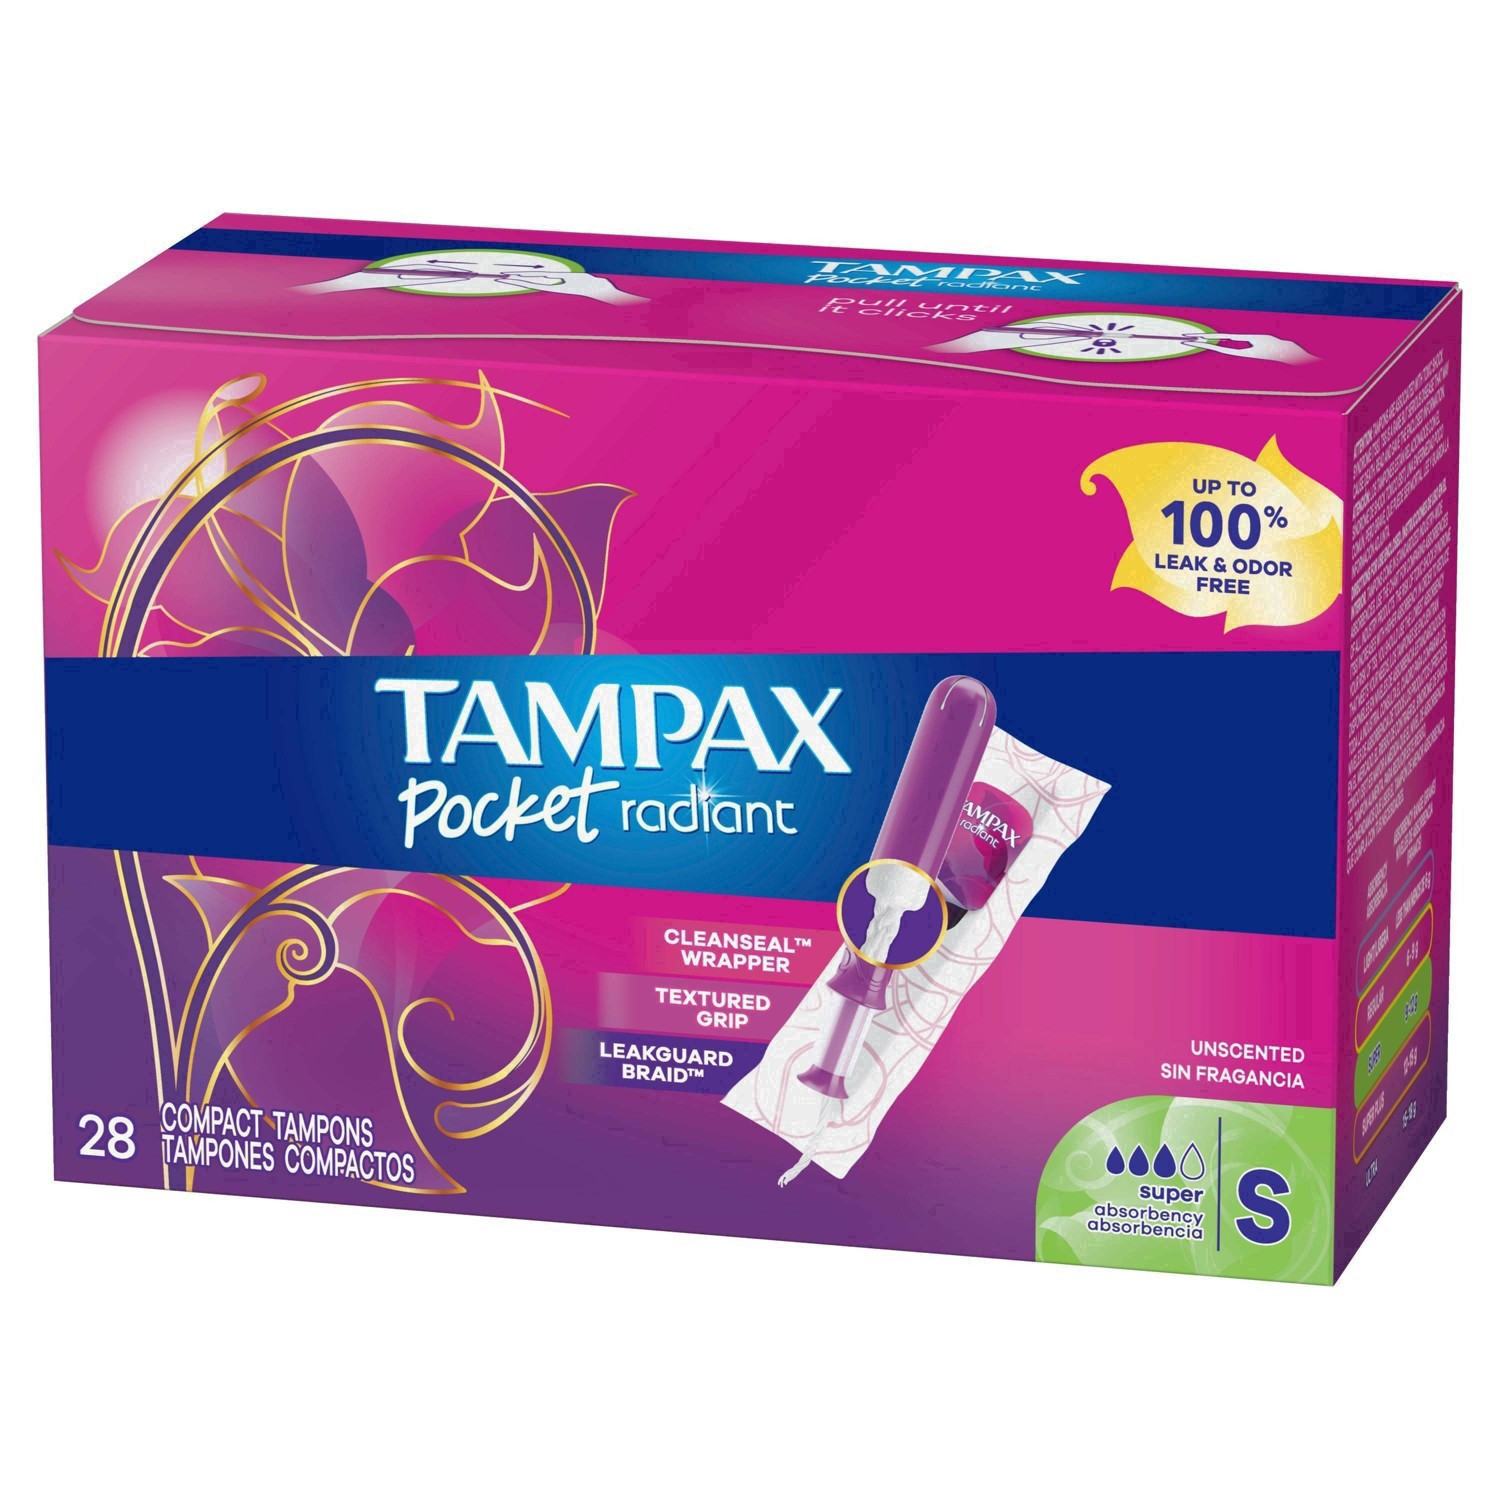 slide 16 of 94, Tampax Pocket Radiant Compact Plastic Tampons, With LeakGuard Braid, Super Absorbency, Unscented, 28 Count, 28 ct